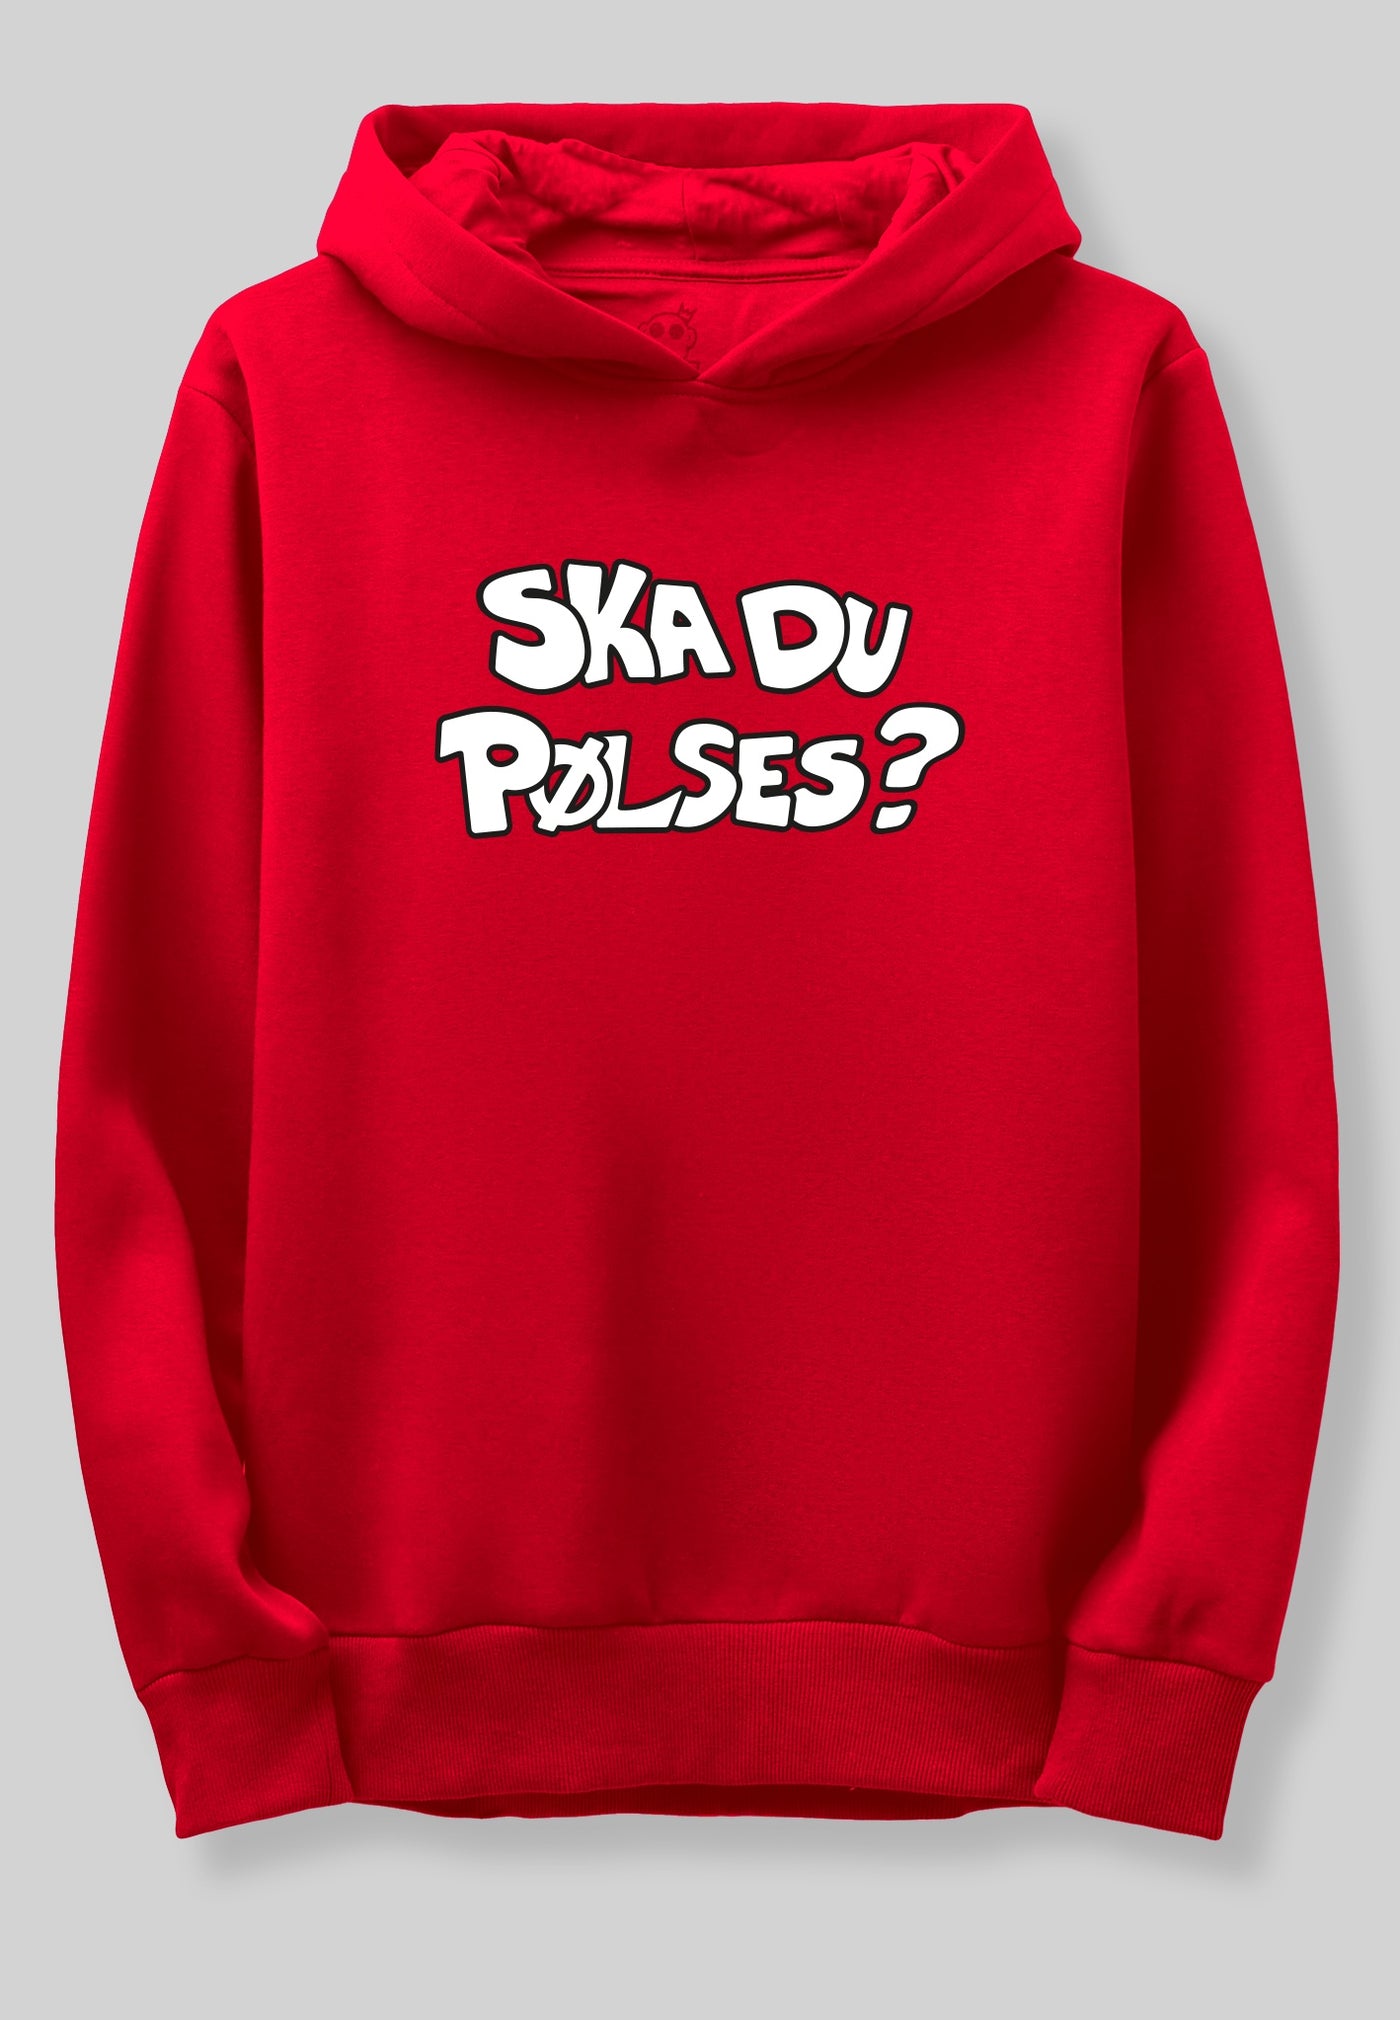 Ask Casper - Do you want the red sausage hoodie?